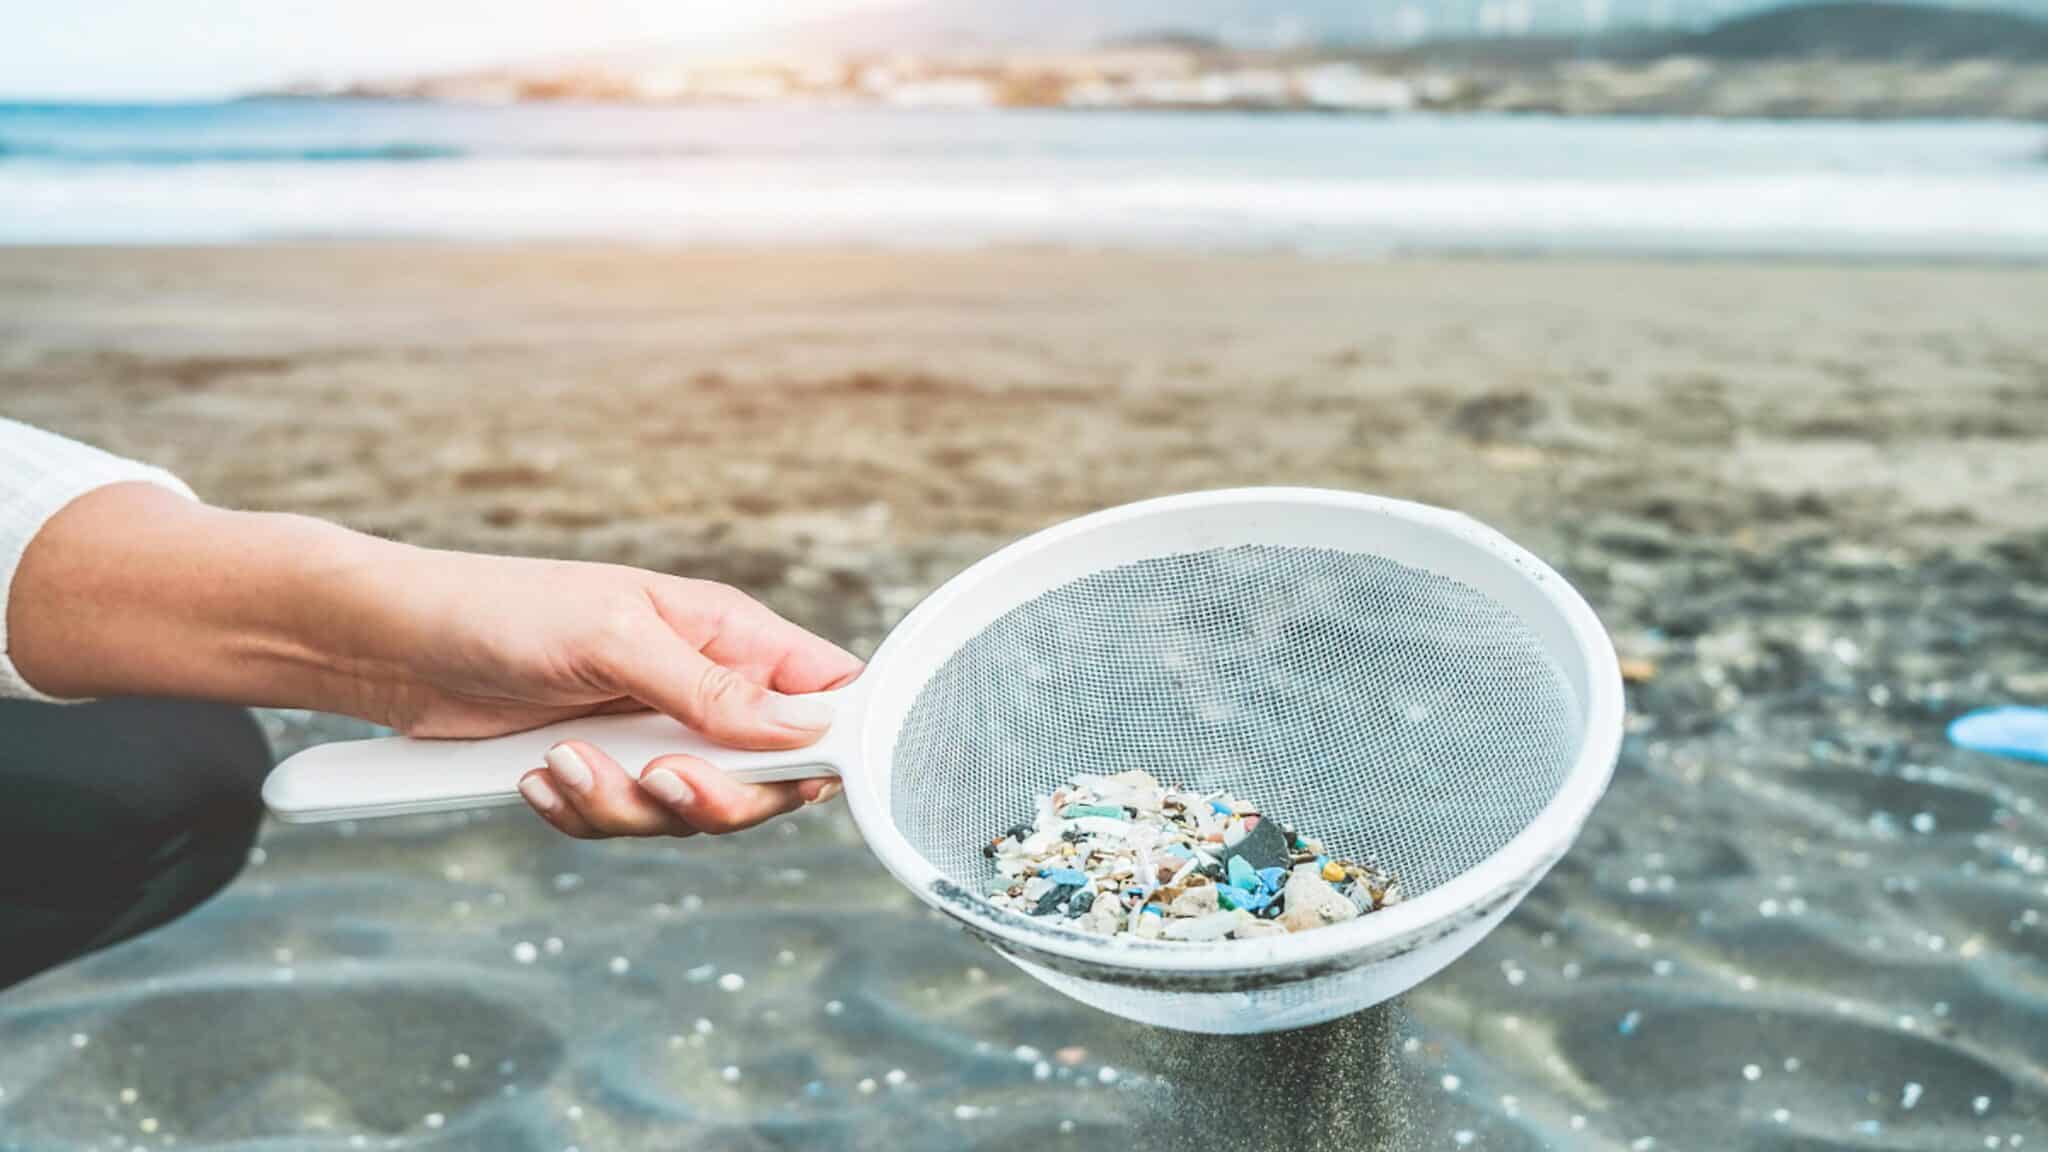 A woman cleans microplastics from sand on the beach.